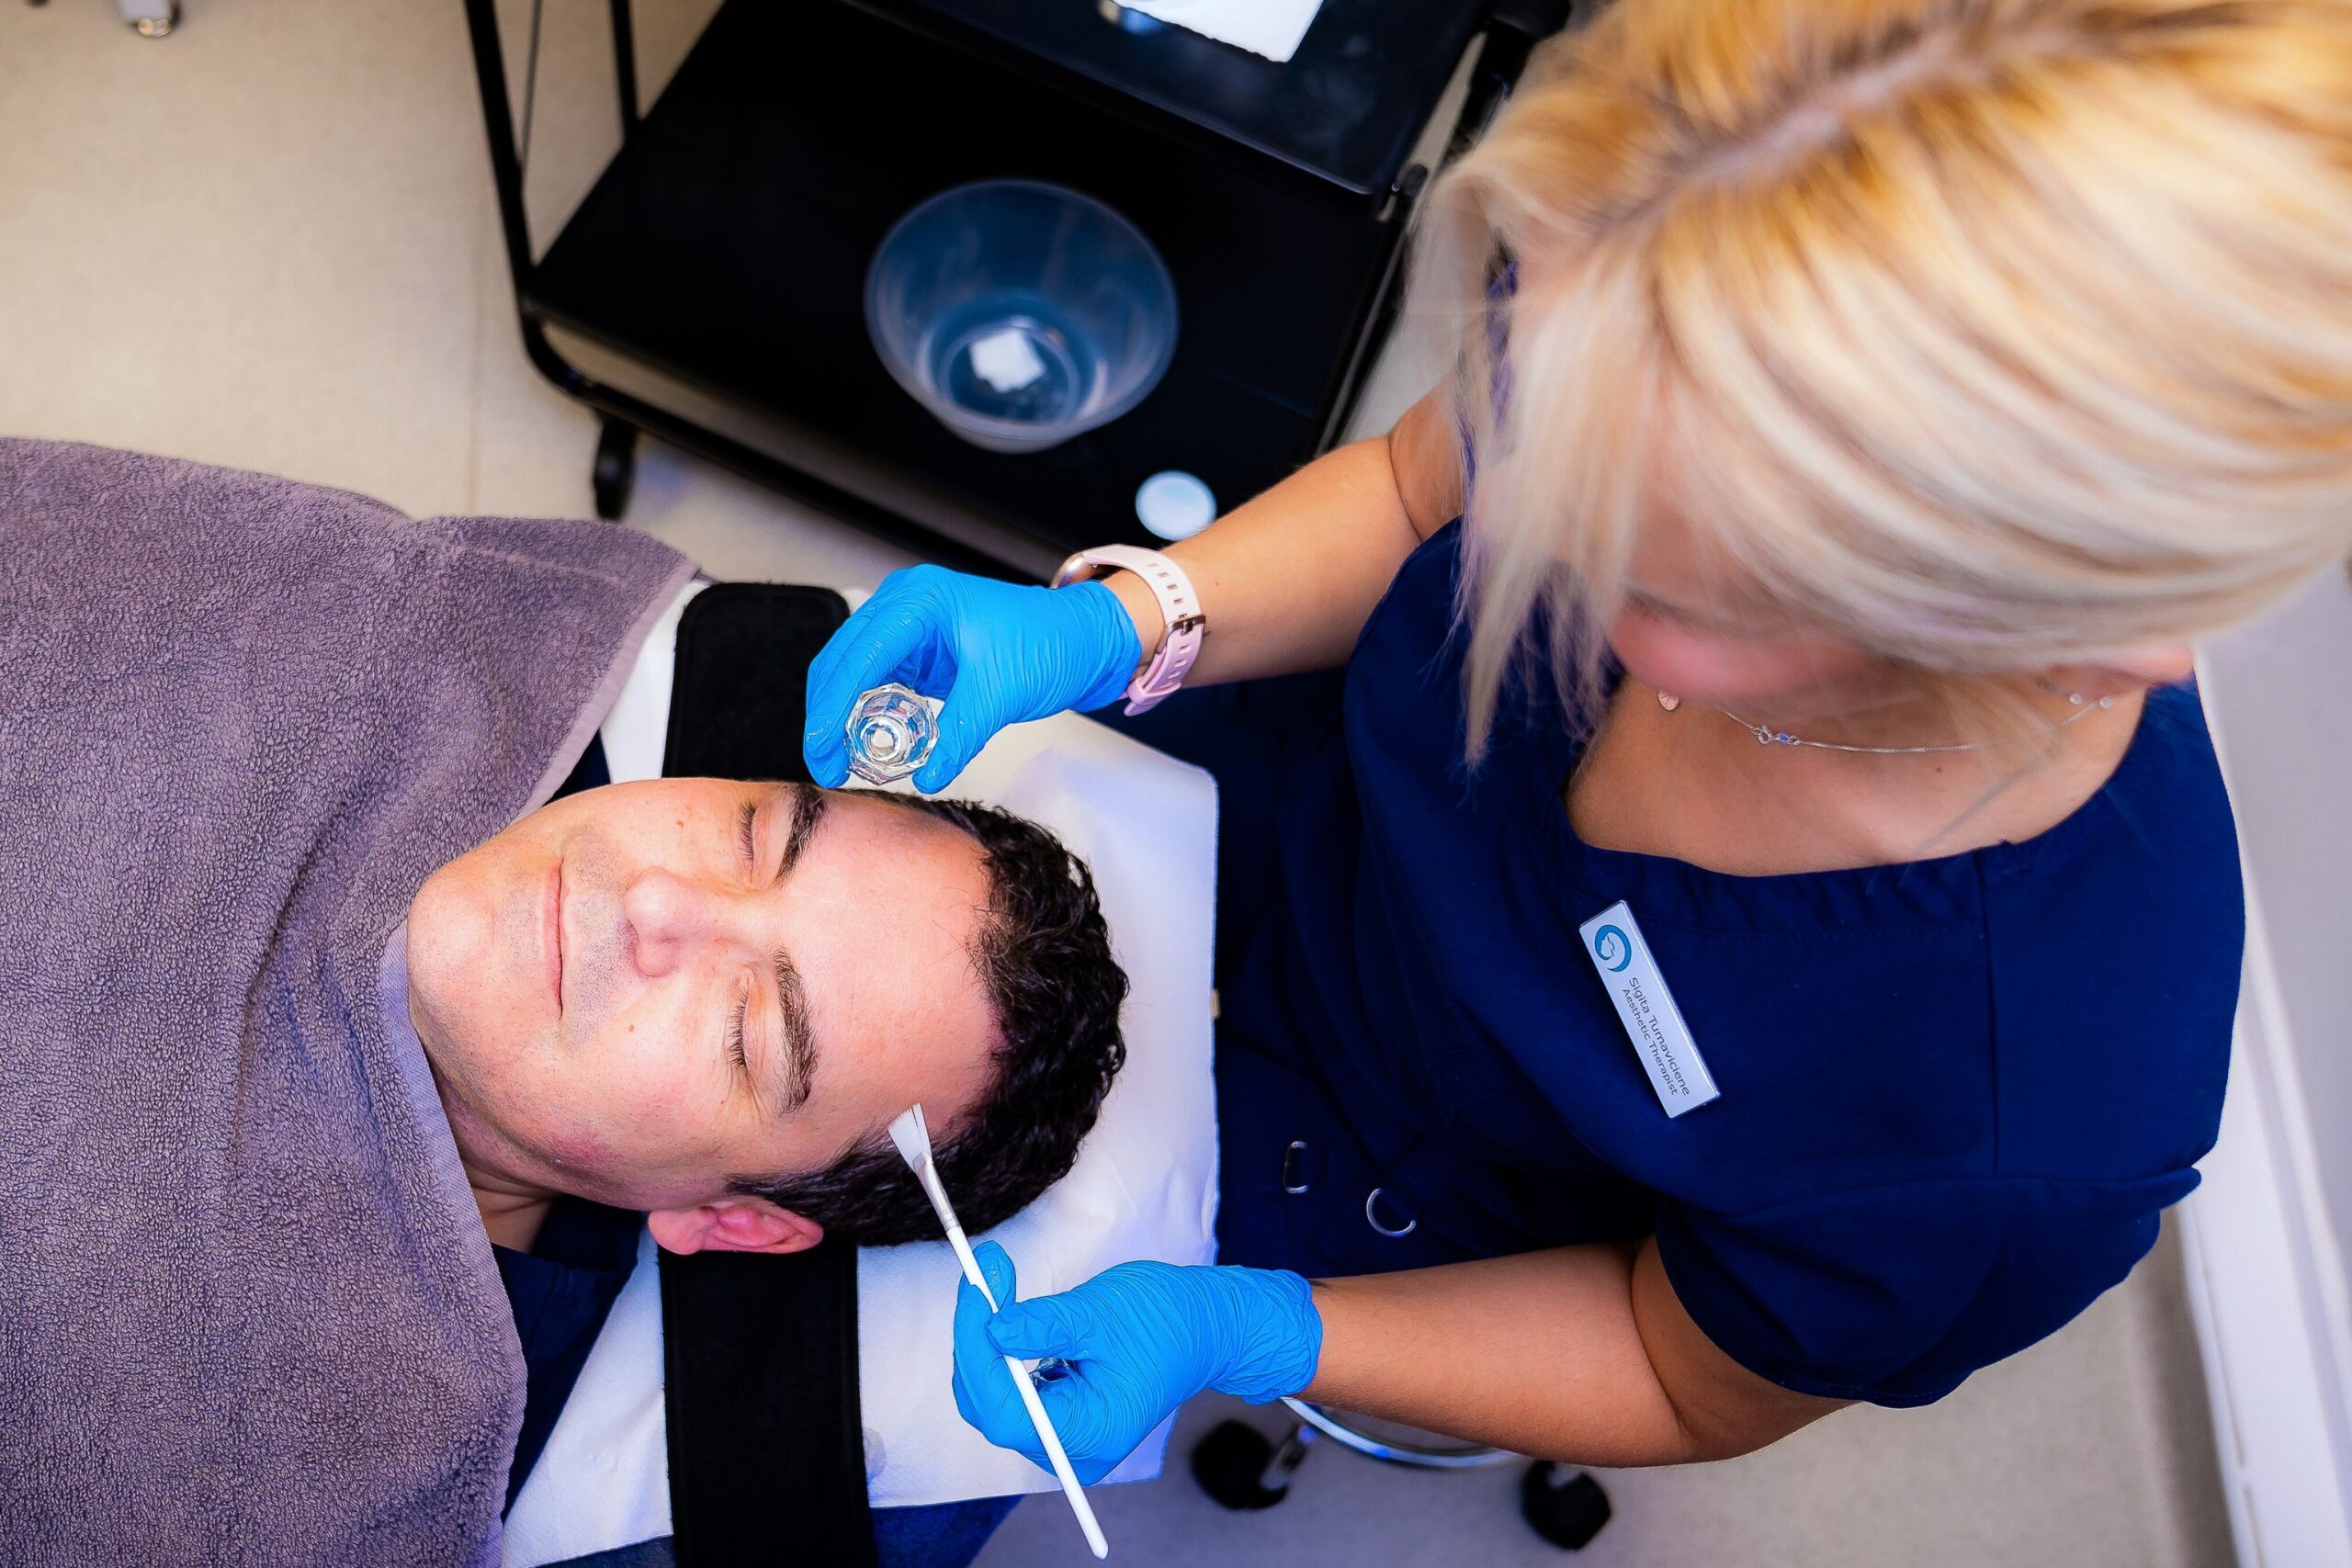 Chemical peels for uneven skin texture  at Freyja Medical in Wrexham, Nantwich and Cheshire